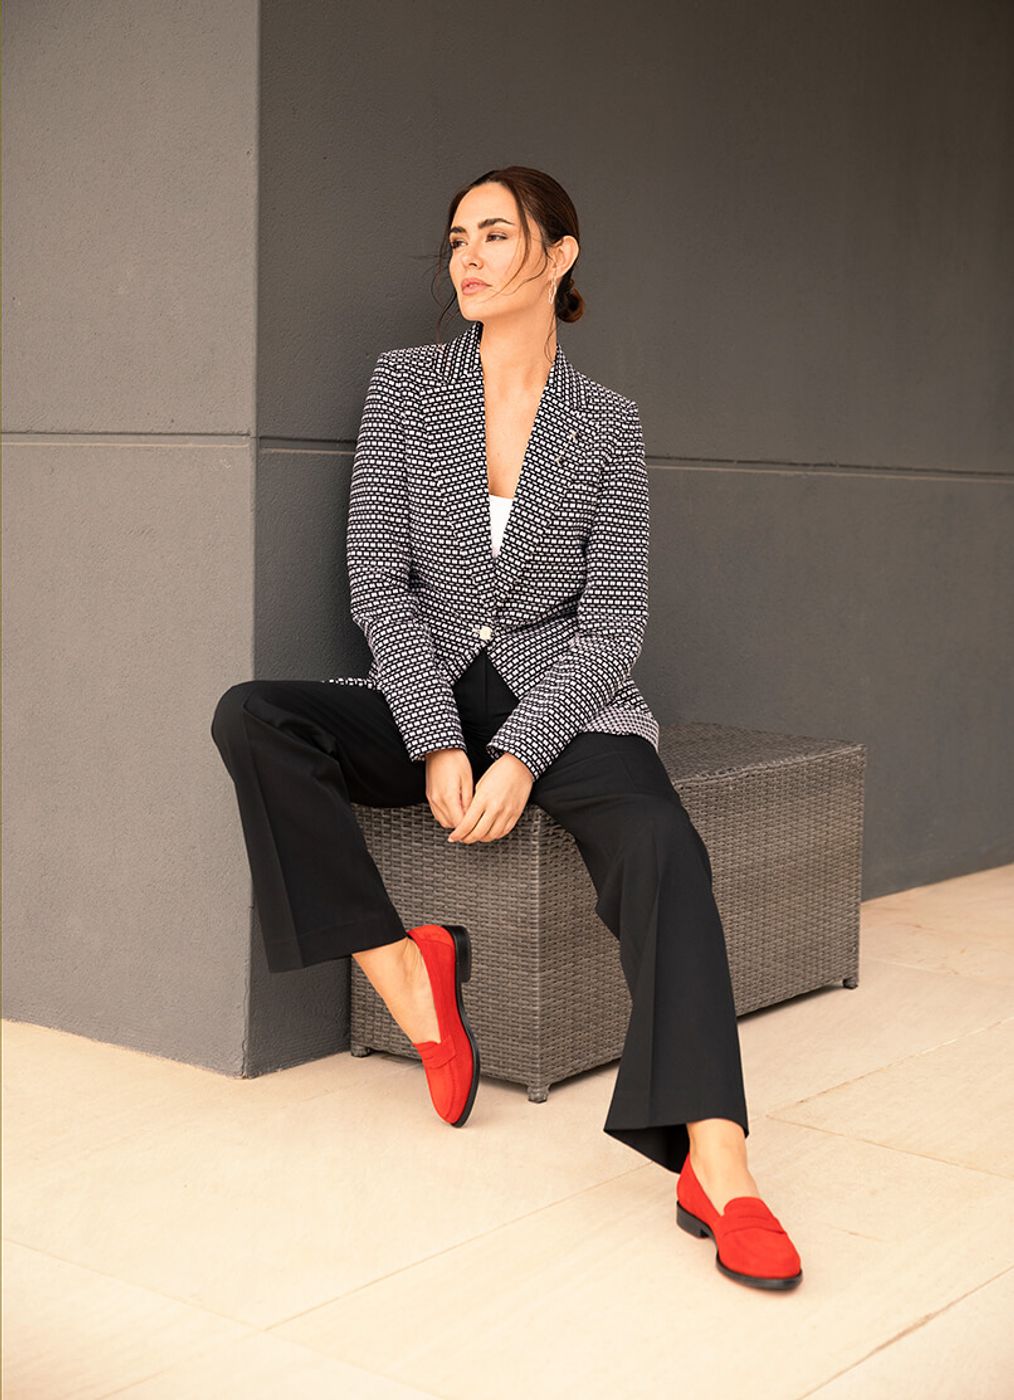 Women's blazer and loafers outfit